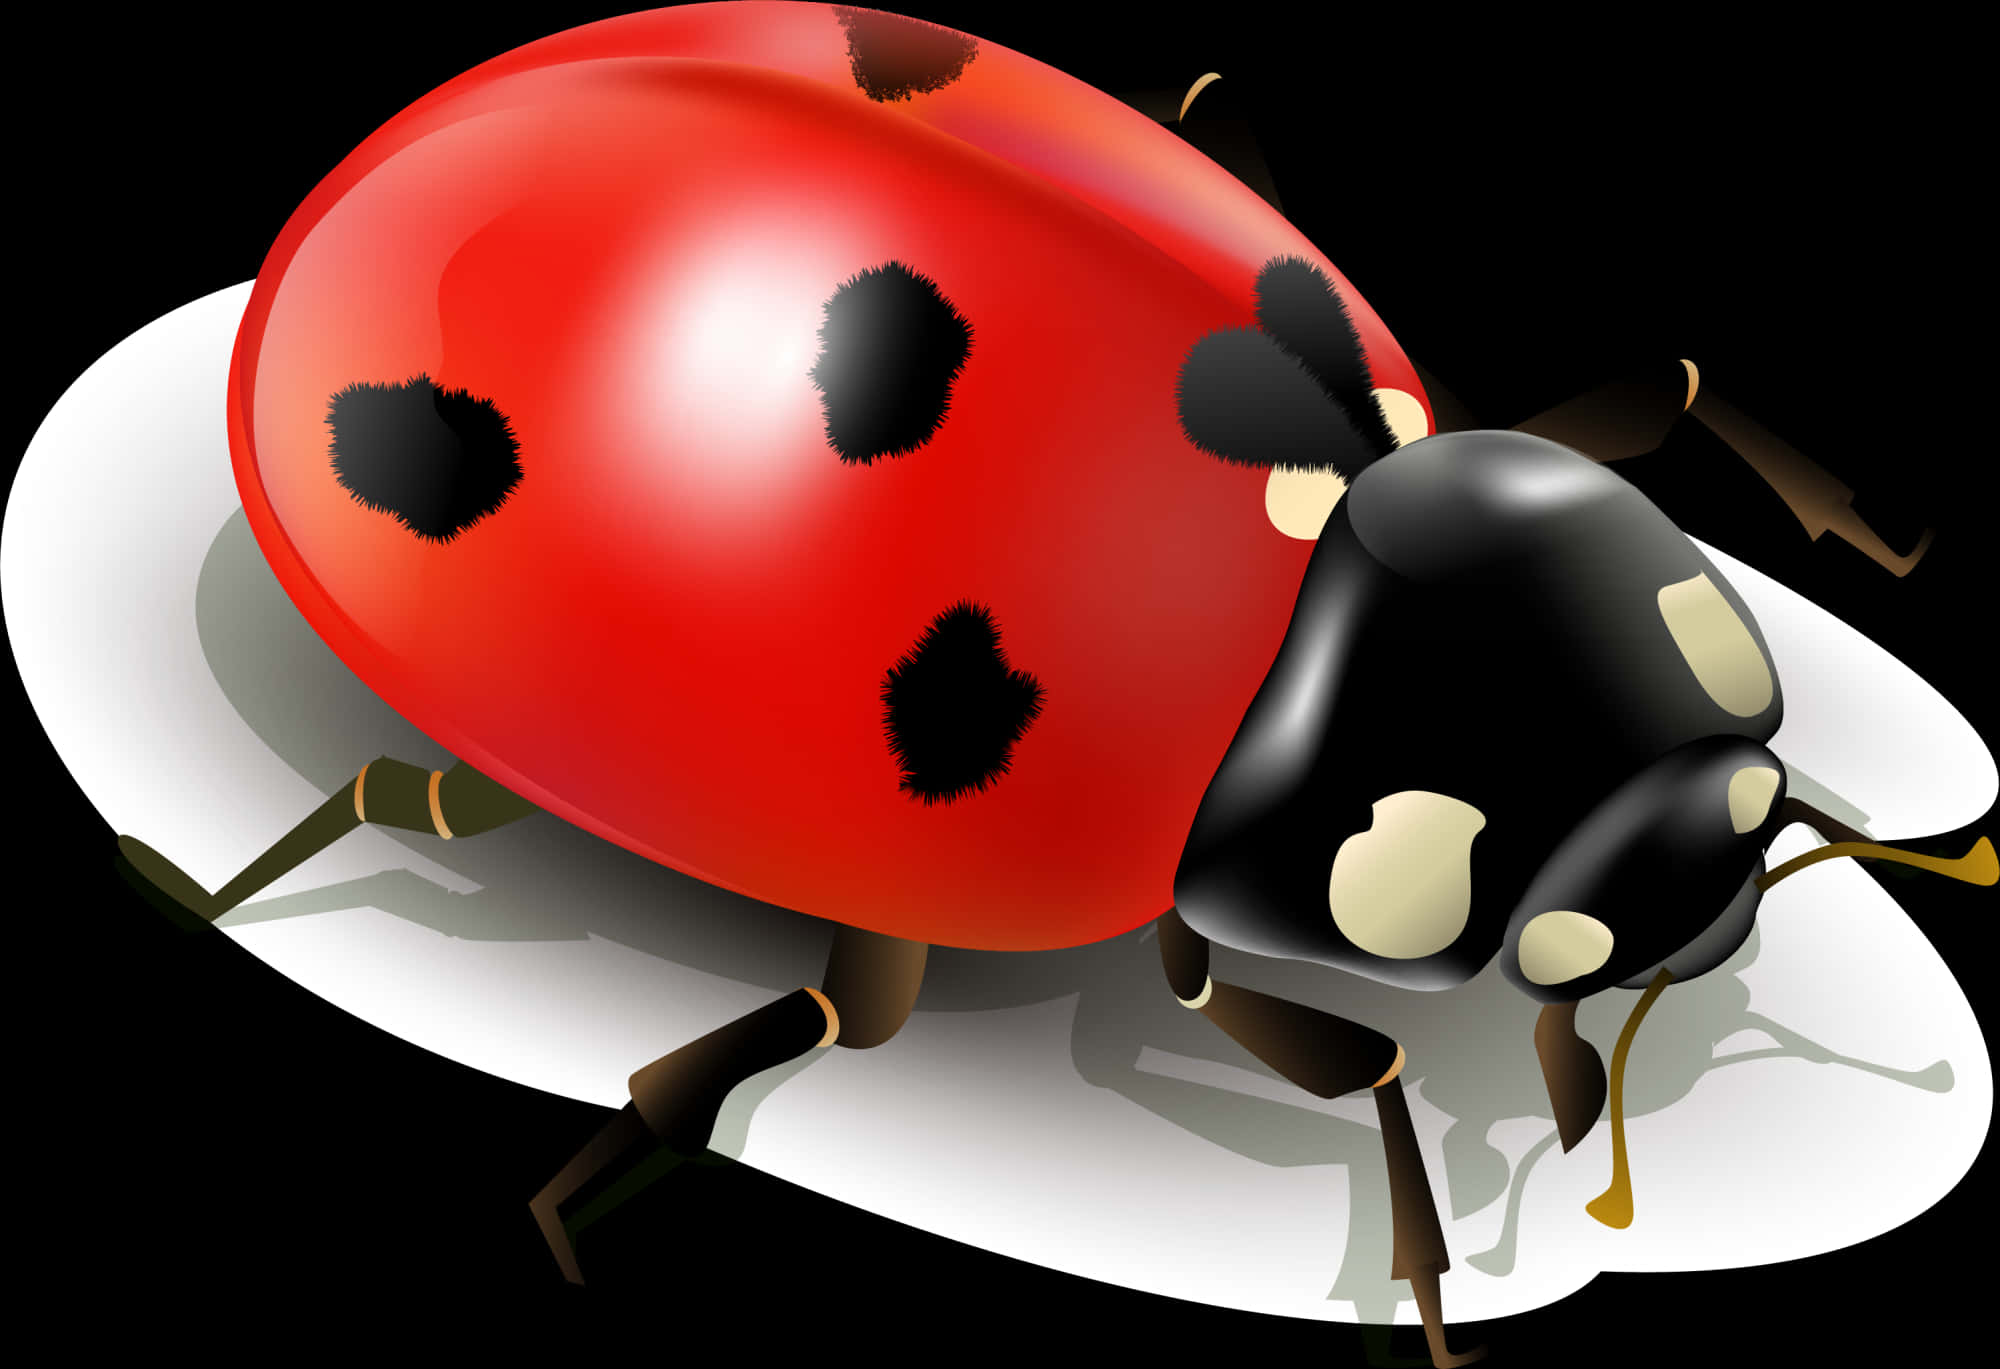 Insect Ladybird Clip Art Simplified Ladybug Ⓒ - Ladybug White Background, Hd Png Download